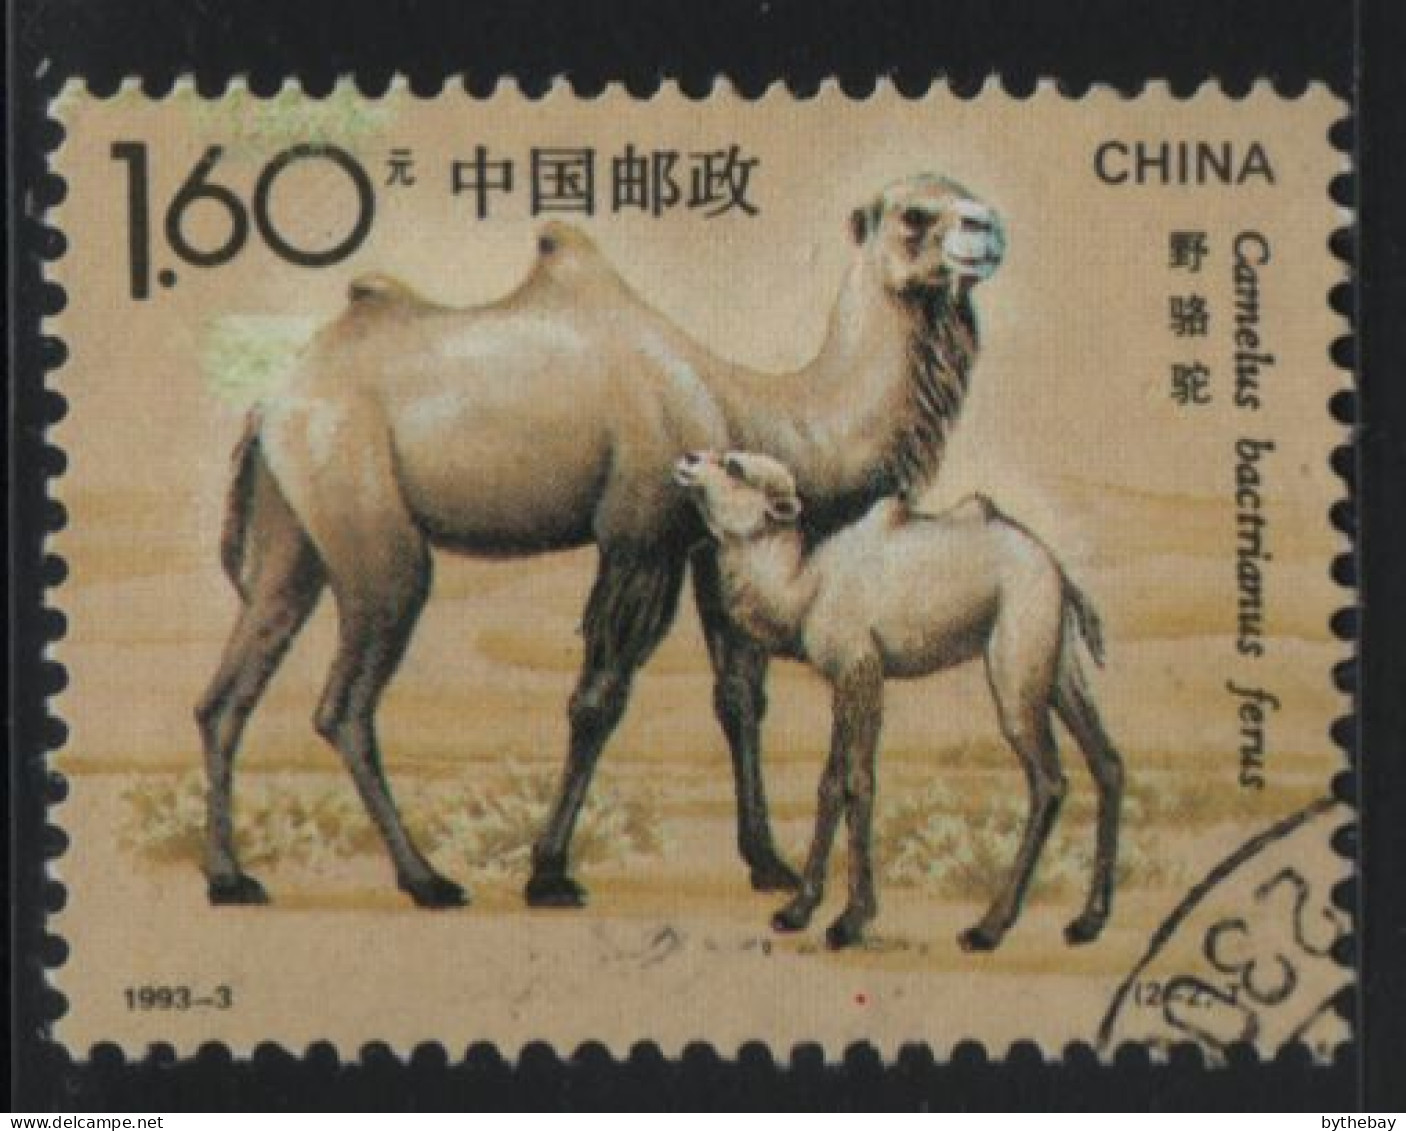 China People's Republic 1993 Used Sc 2434 $1.60 Camels - Gebraucht